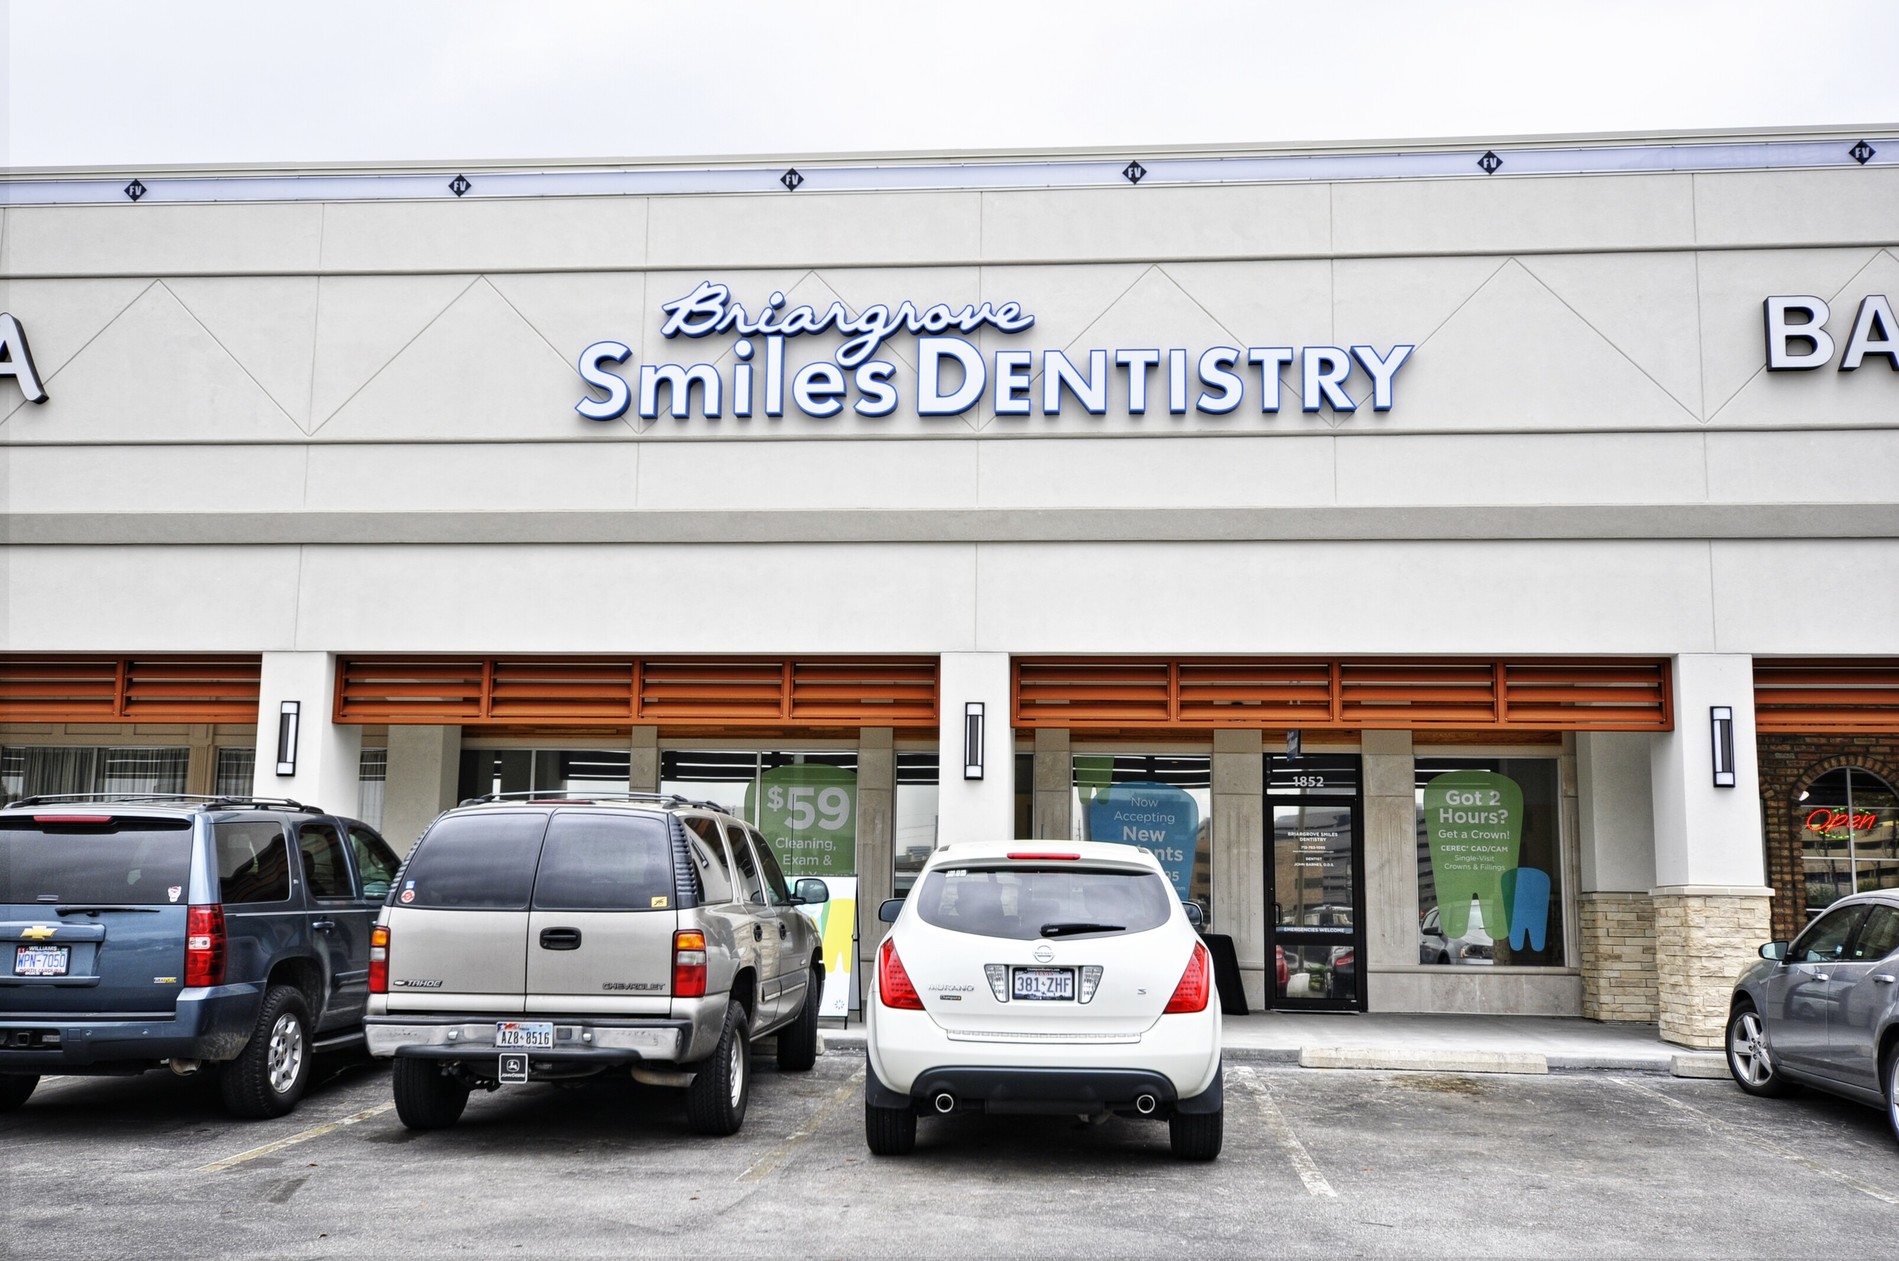 Images Briargrove Smiles Dentistry